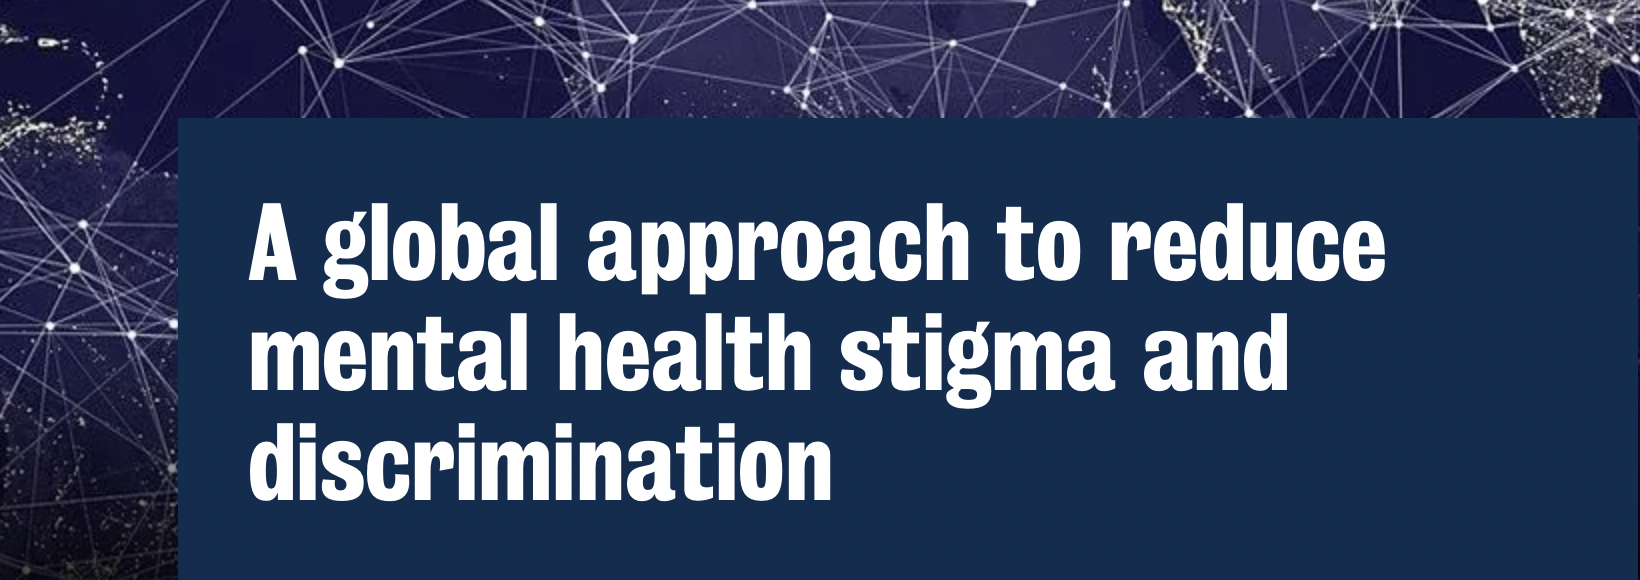 A global approach to reduce mental health stigma and discrimination